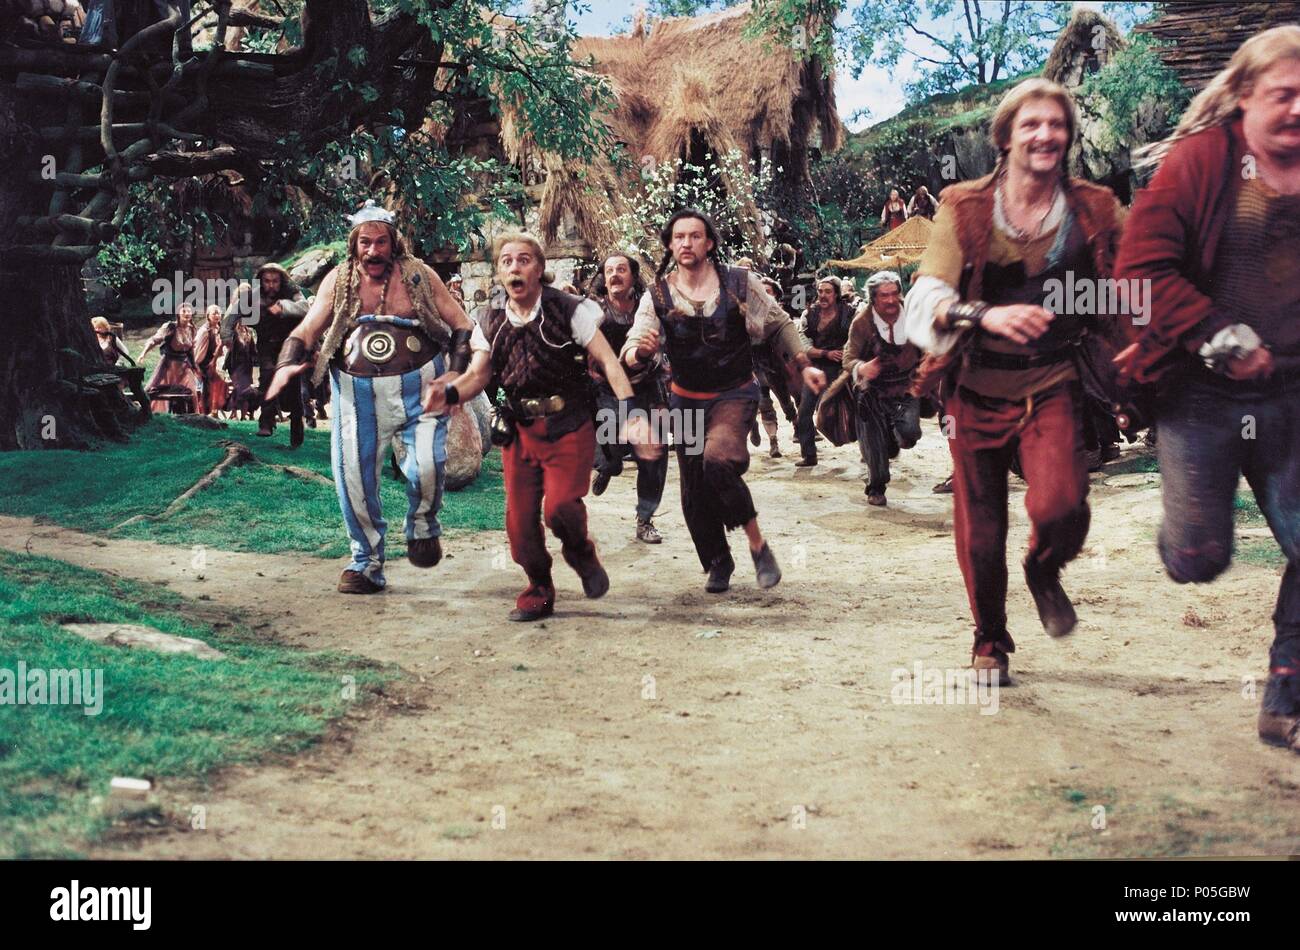 Original Film Title: ASTERIX ET OBELIX CONTRE CESAR.  English Title: ASTERIX AND OBELIX VS. CAESAR.  Film Director: CLAUDE ZIDI.  Year: 1999.  Stars: GERARD DEPARDIEU; CHRISTIAN CLAVIER. Copyright: Editorial inside use only. This is a publicly distributed handout. Access rights only, no license of copyright provided. Mandatory authorization to Visual Icon (www.visual-icon.com) is required for the reproduction of this image. Credit: RENN PRODUCTIONS / GEORGE, ETIENNE / Album Stock Photo